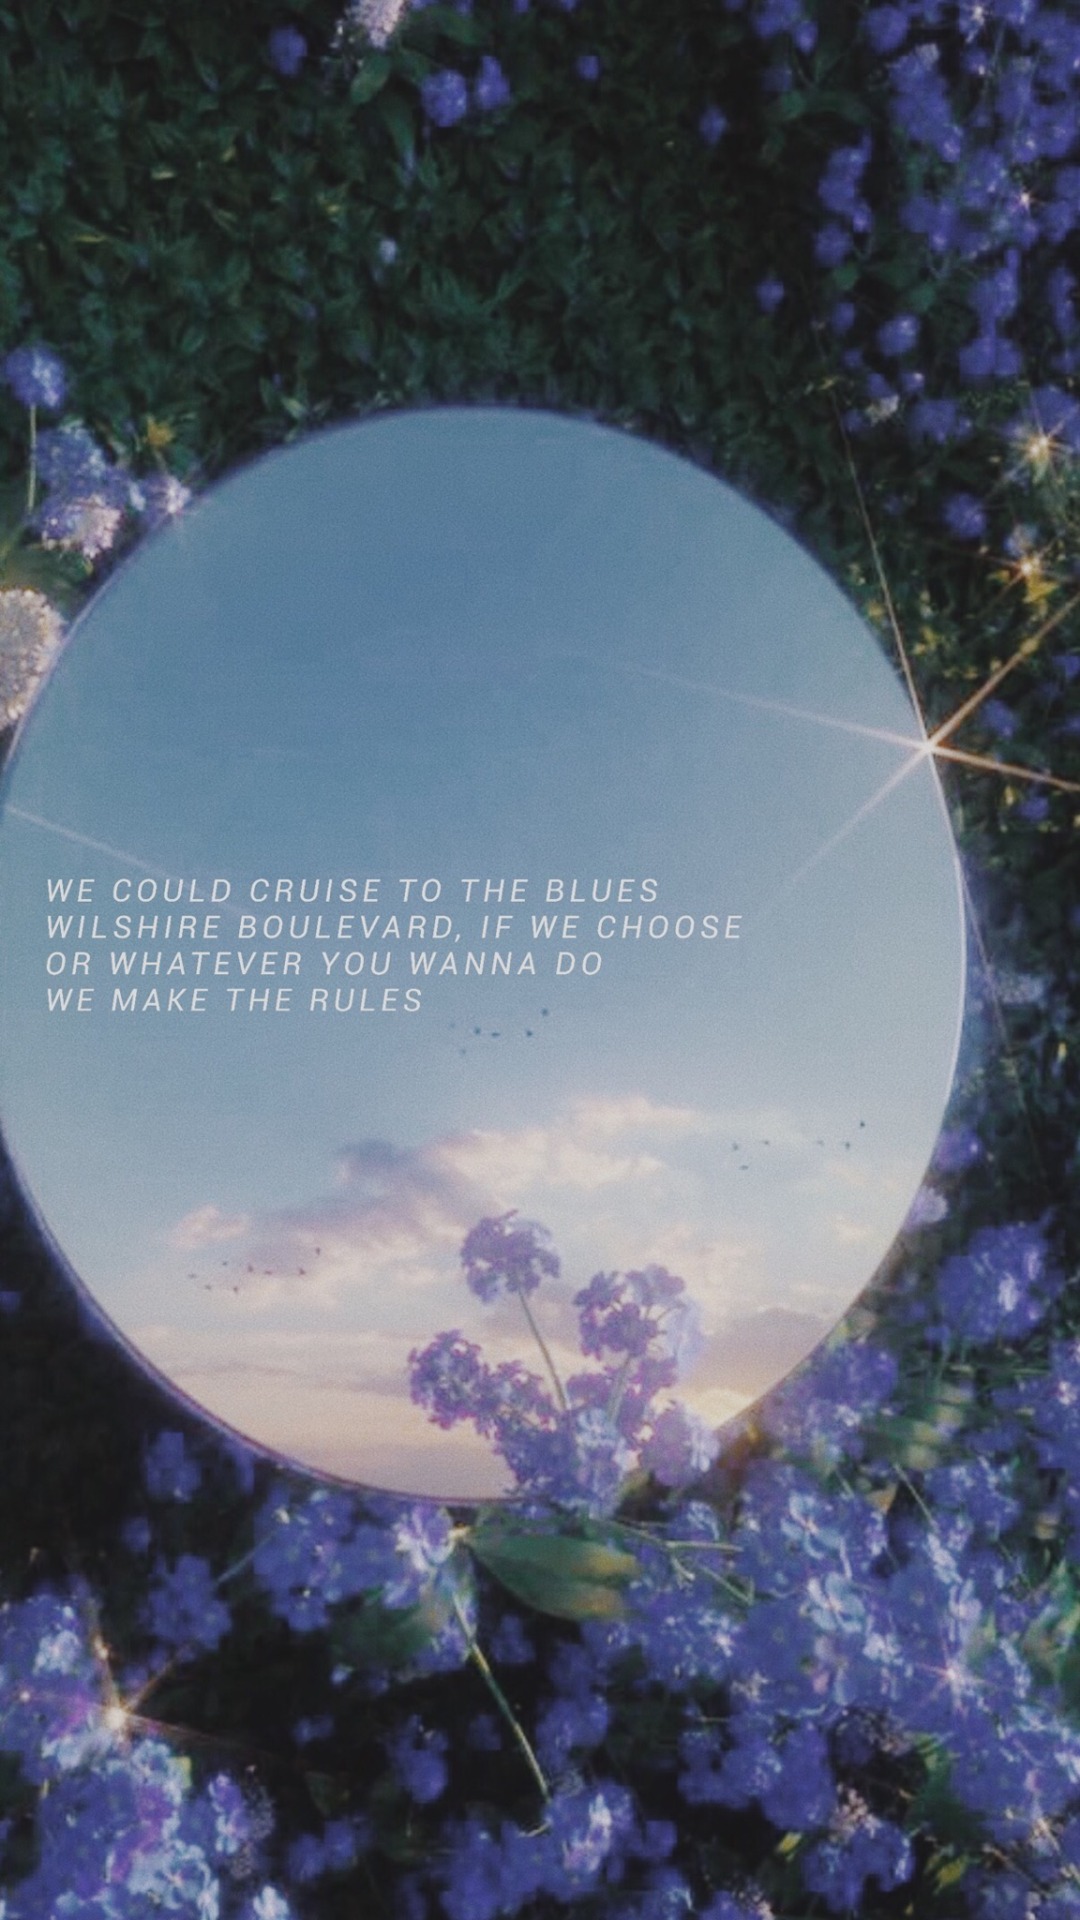 Aesthetic background with a quote from the movie 